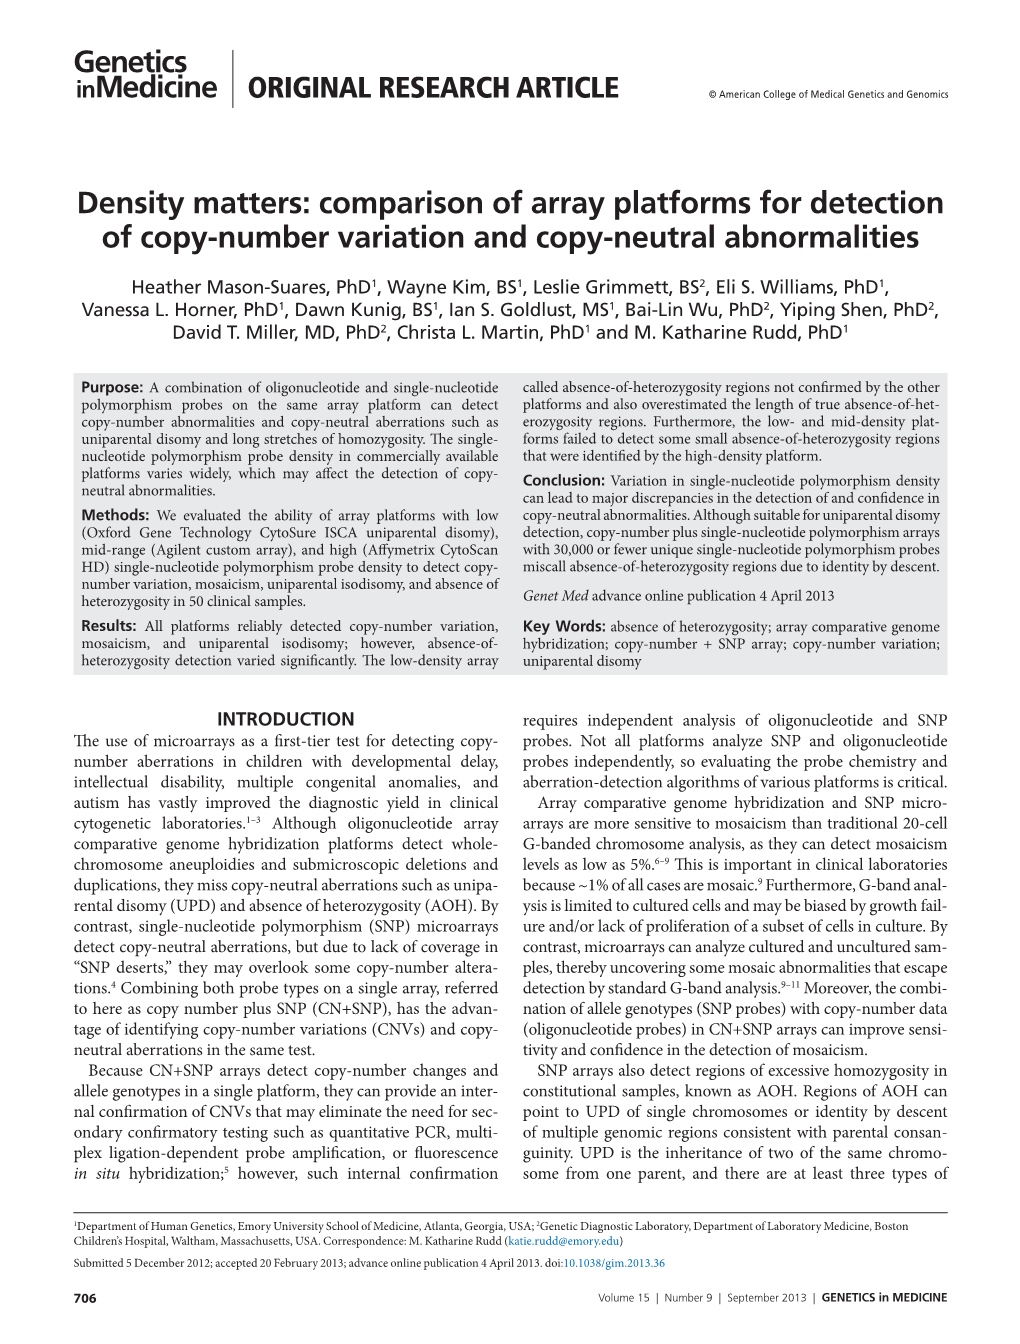 Comparison of Array Platforms for Detection of Copy-Number Variation and Copy-Neutral Abnormalities